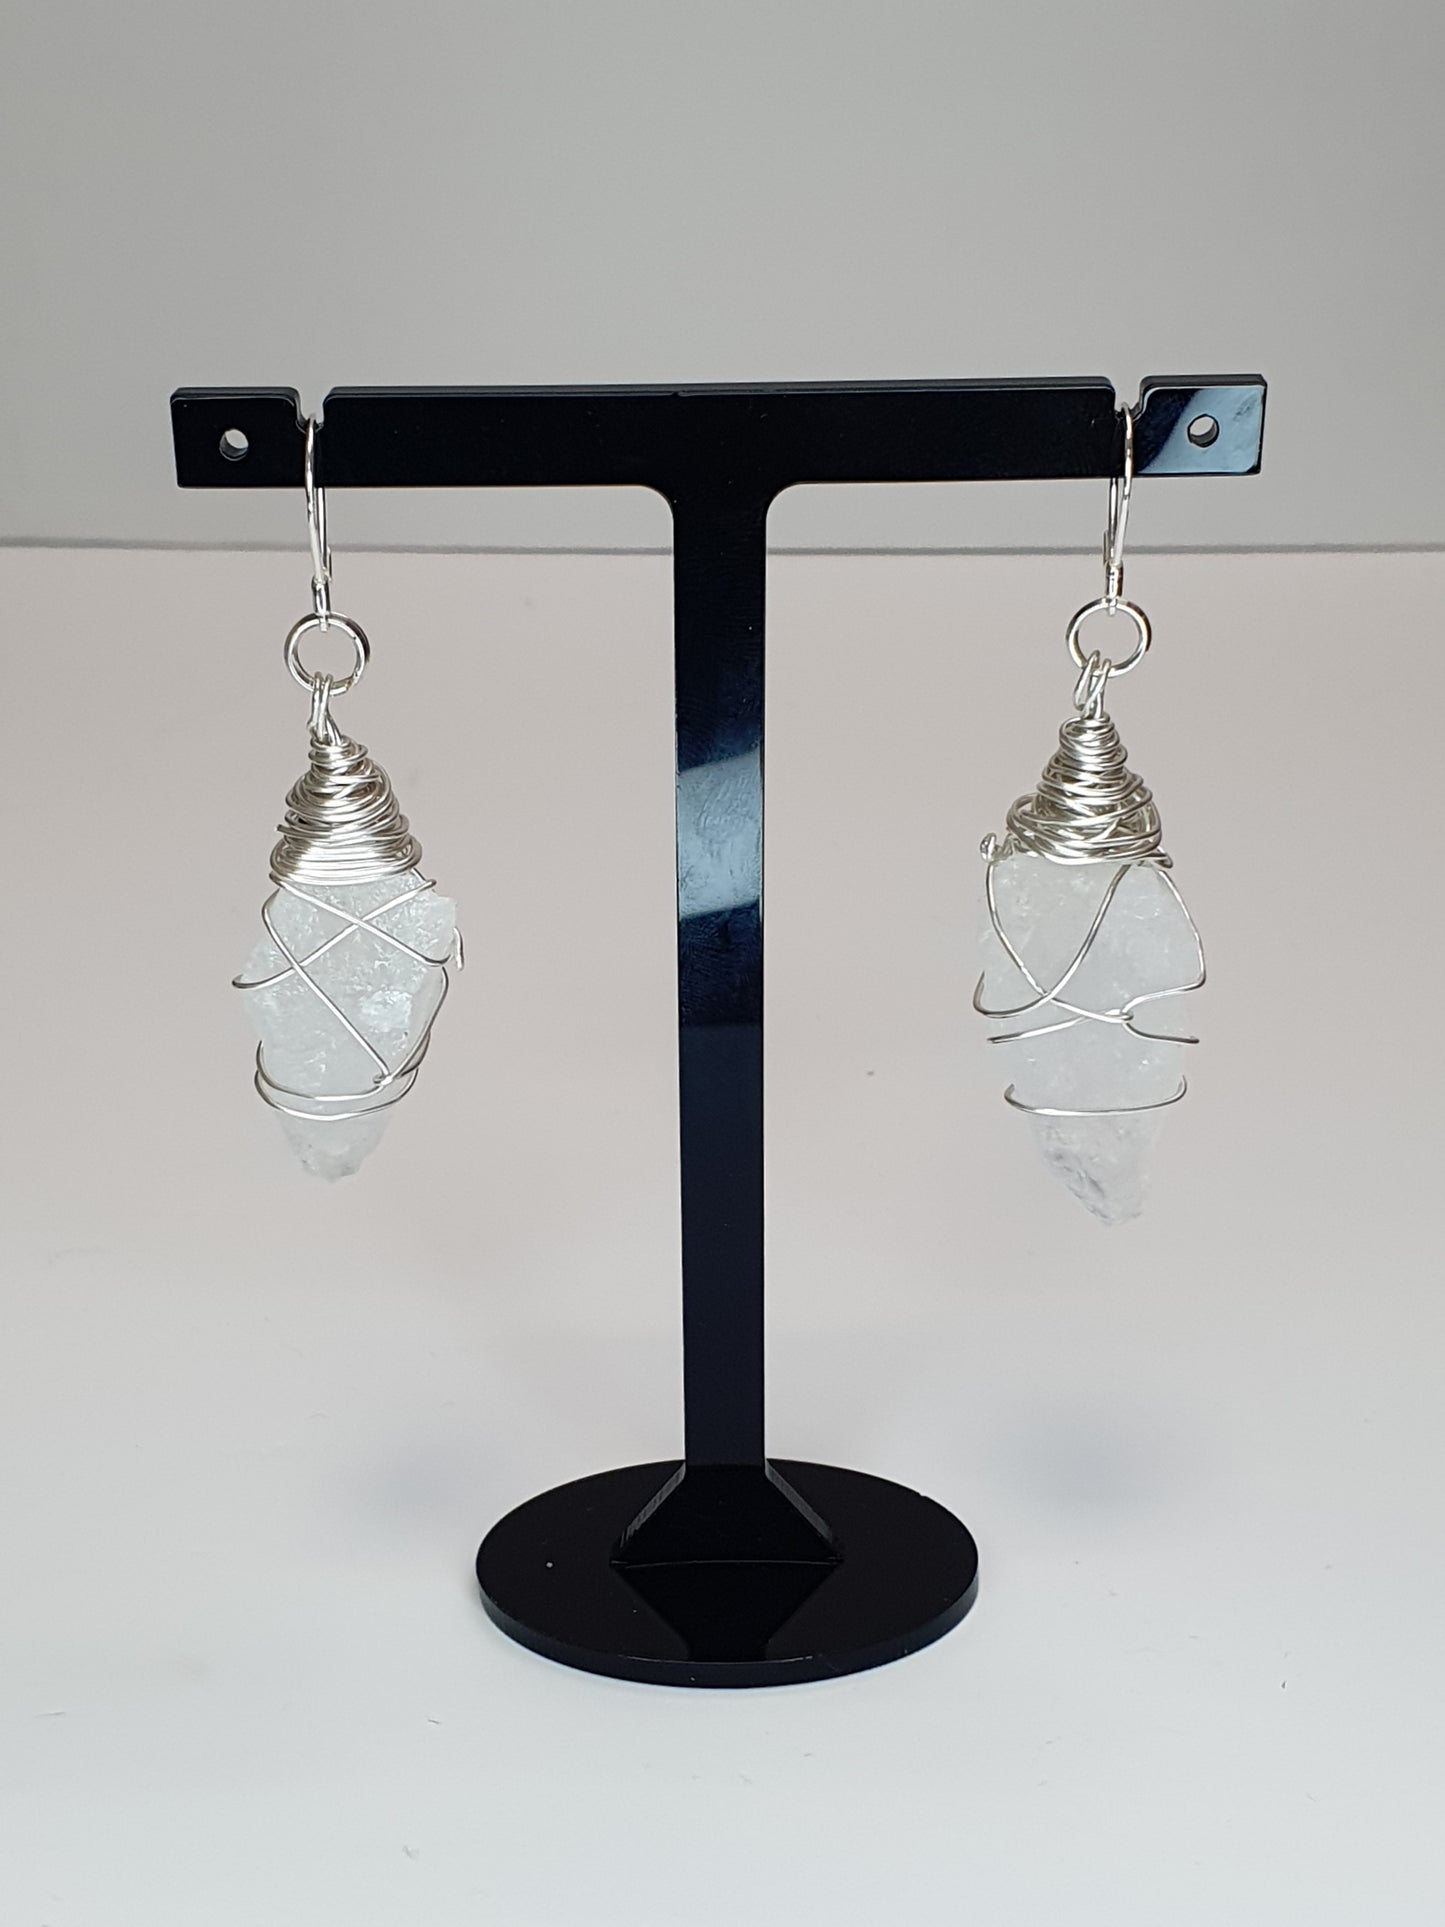 Quartz and sterling silver earrings.